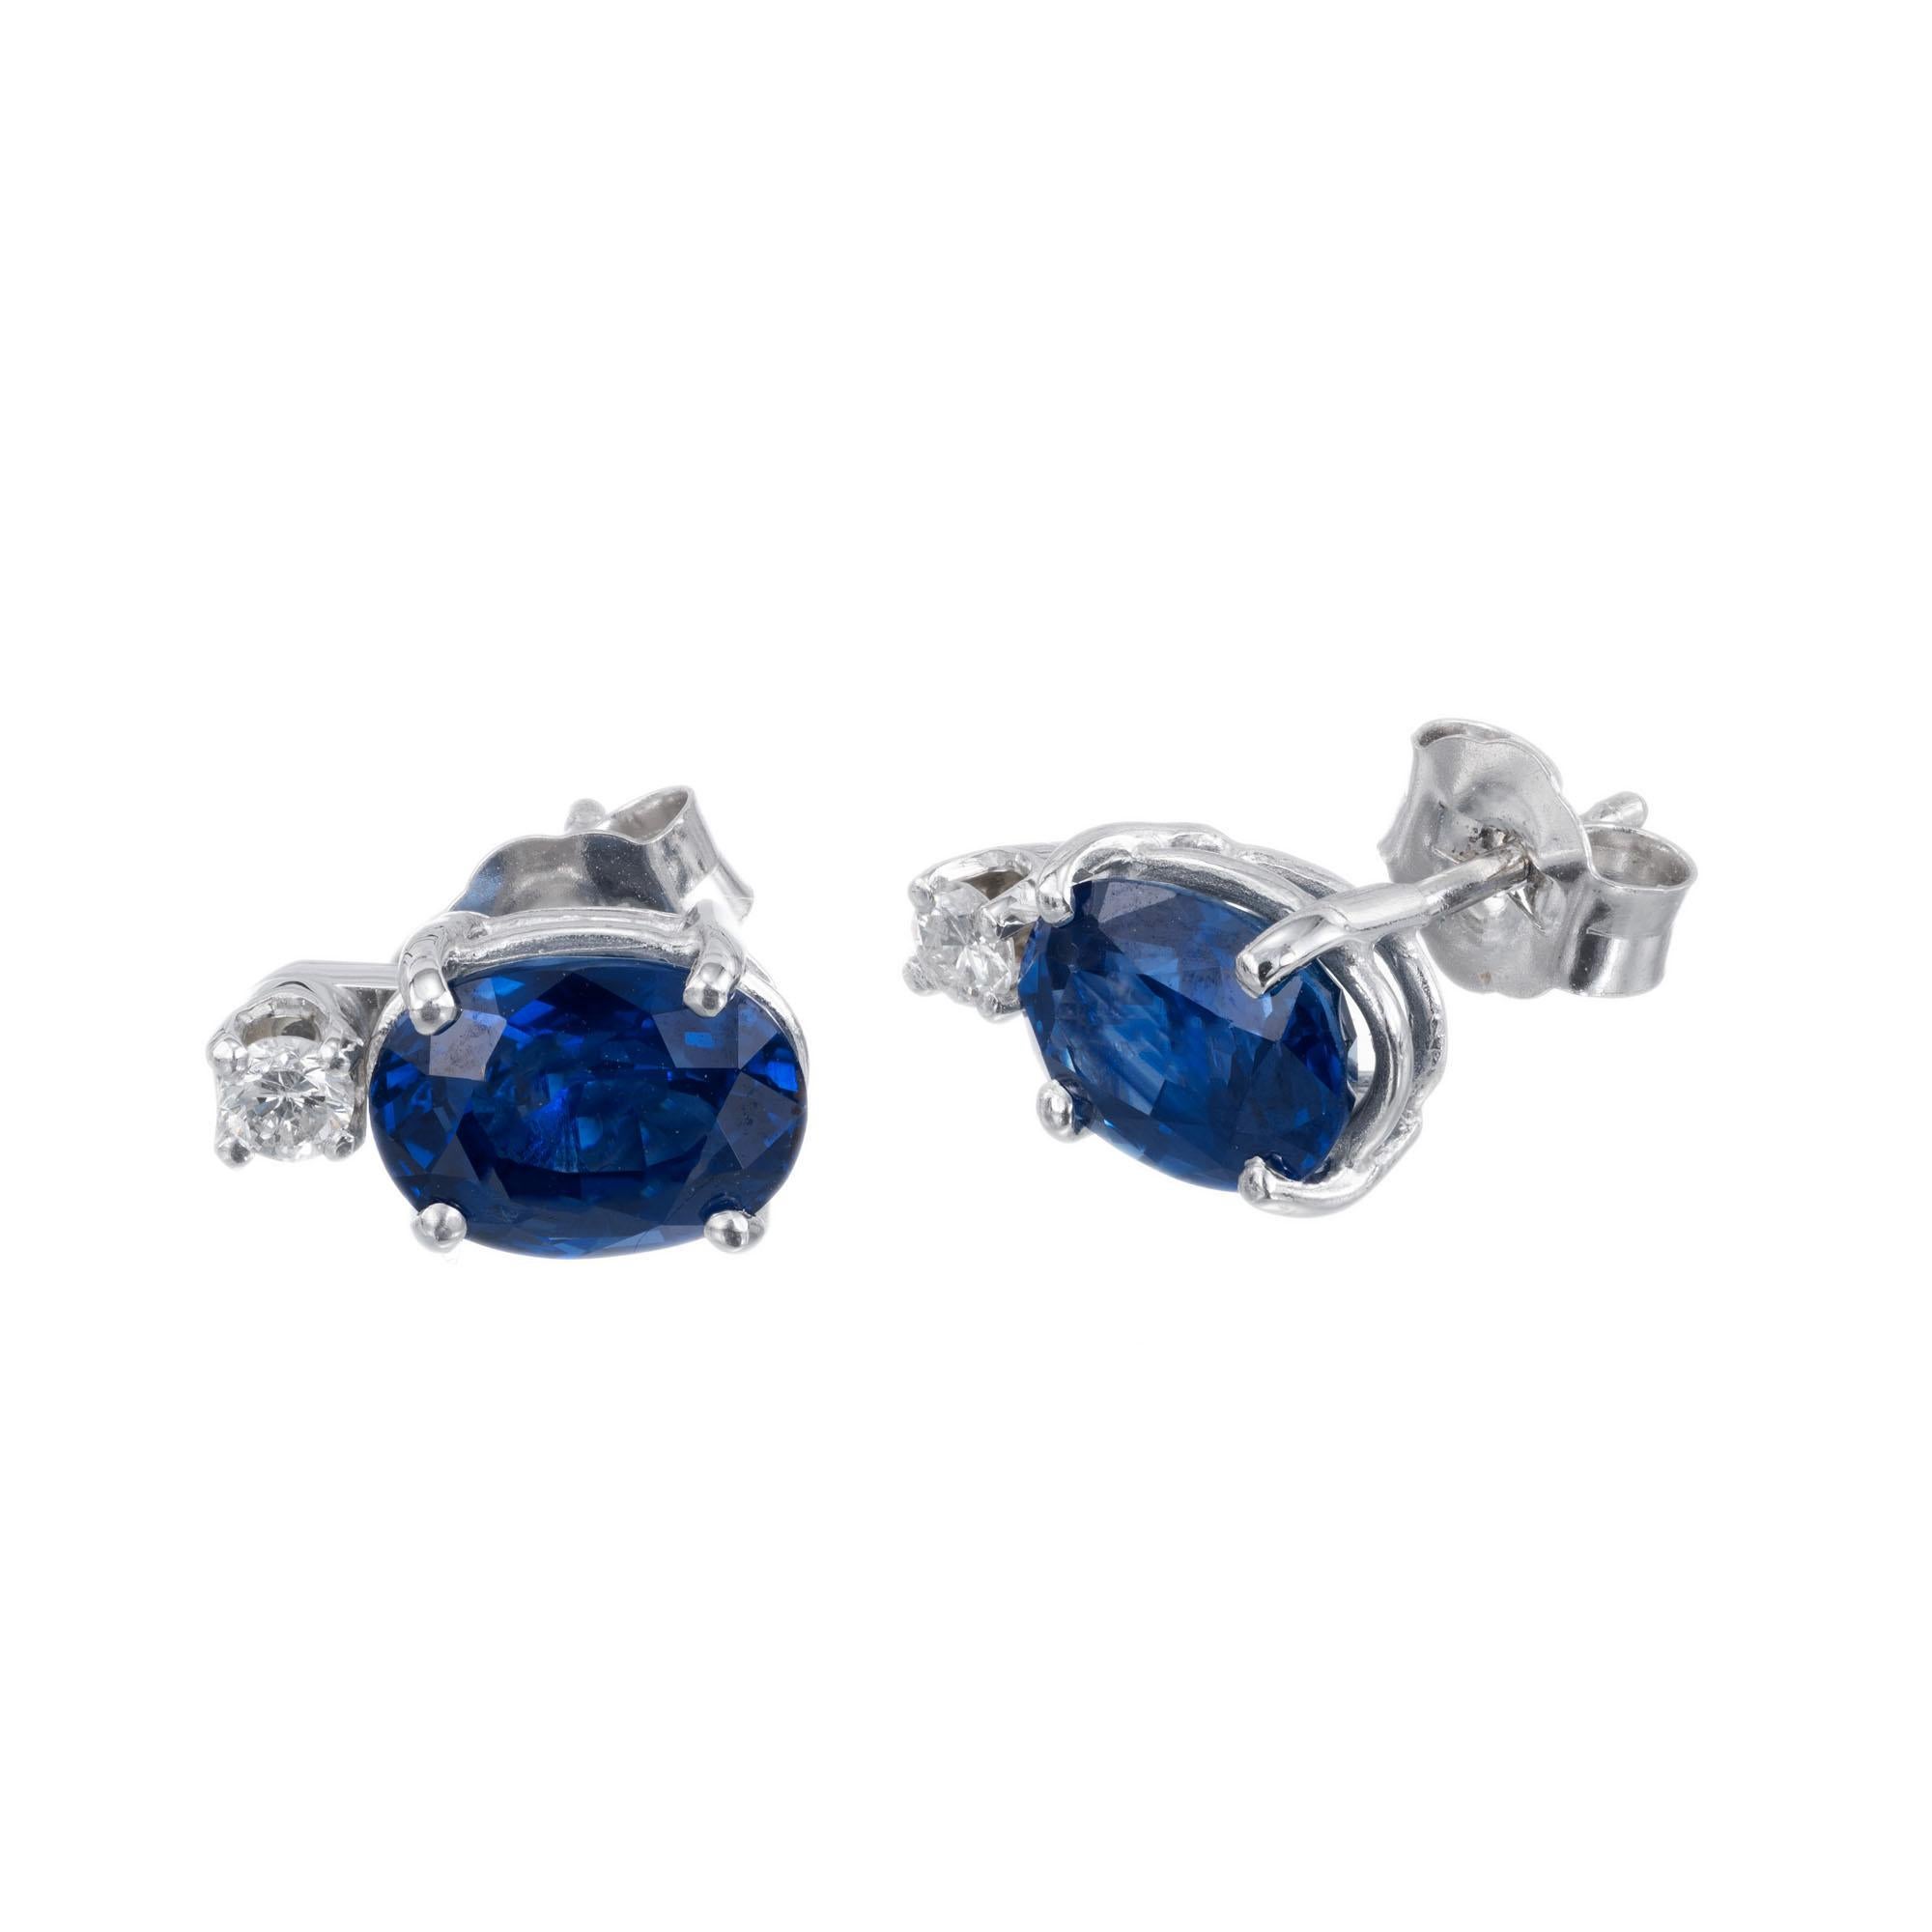 Blue oval sapphires 2.62 carat total GIA certified natural sapphire simple heat only set in a simple 14k white gold diamond earrings in the Peter Suchy workshop 

2 round brilliant cut diamonds G SI, approx. .9ct
1 oval cut blue sapphire MI, approx.